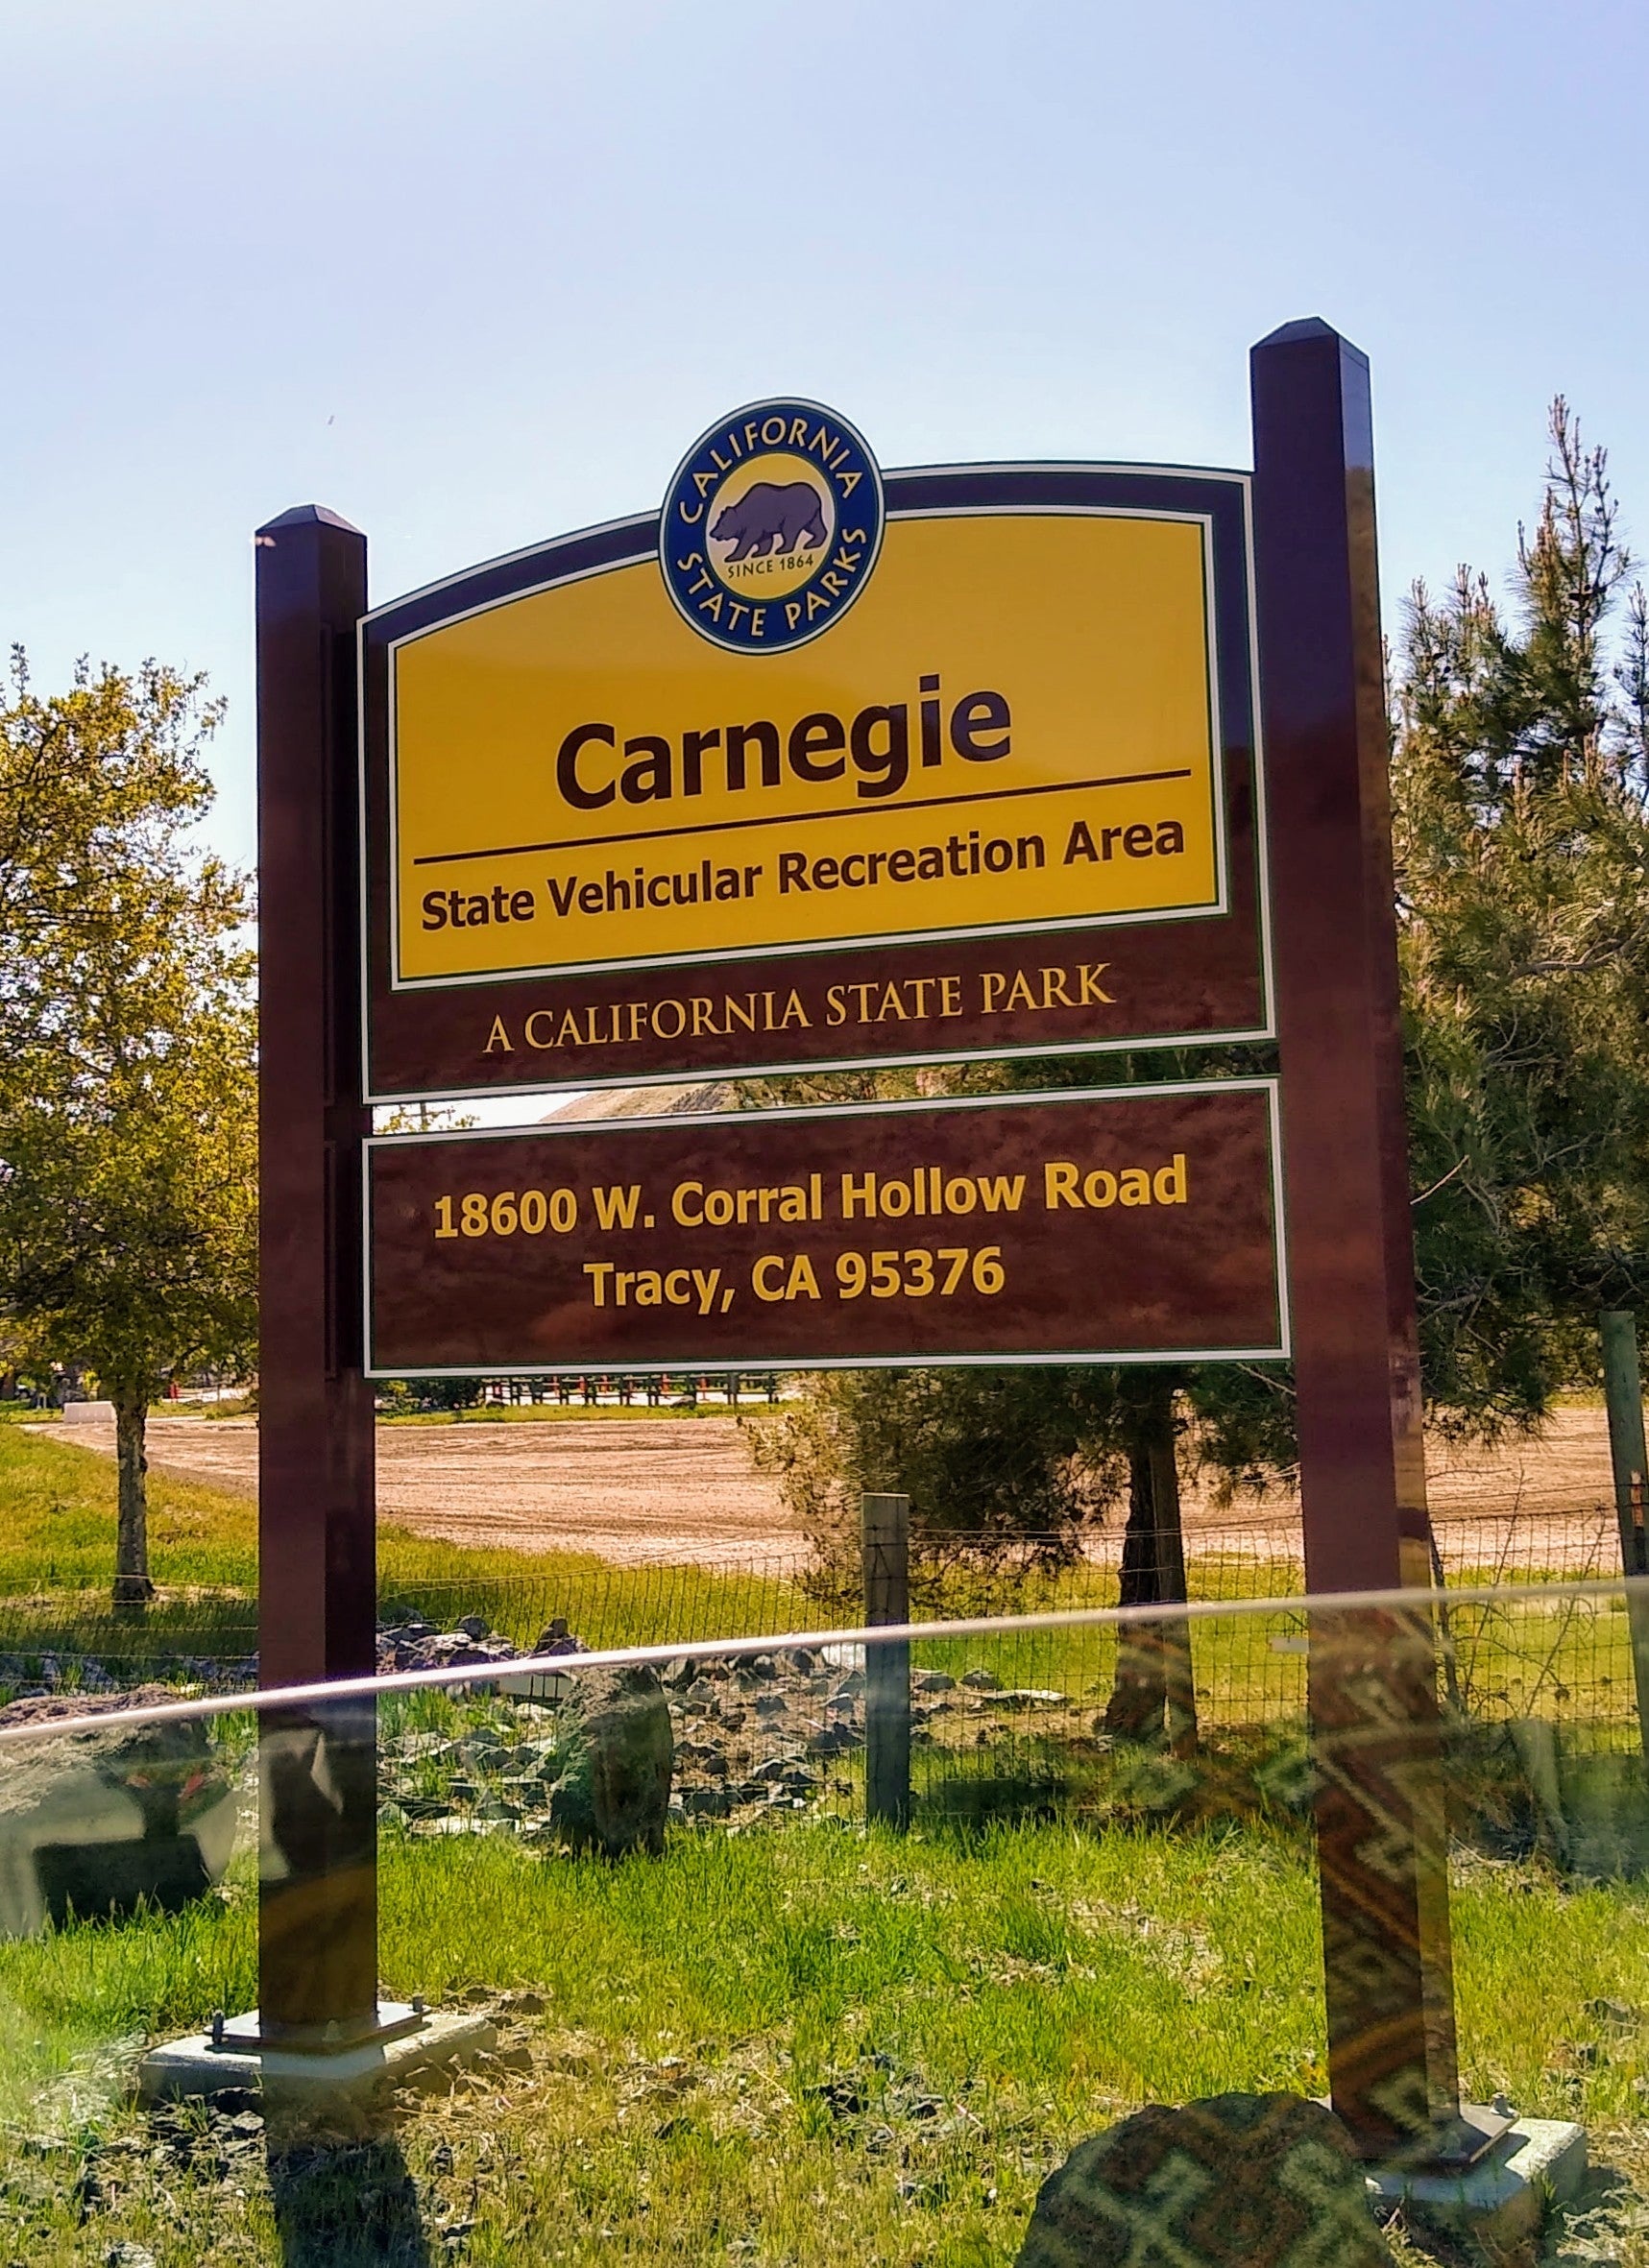 Camper submitted image from Carnegie State Vehicle Recreation Area - 1